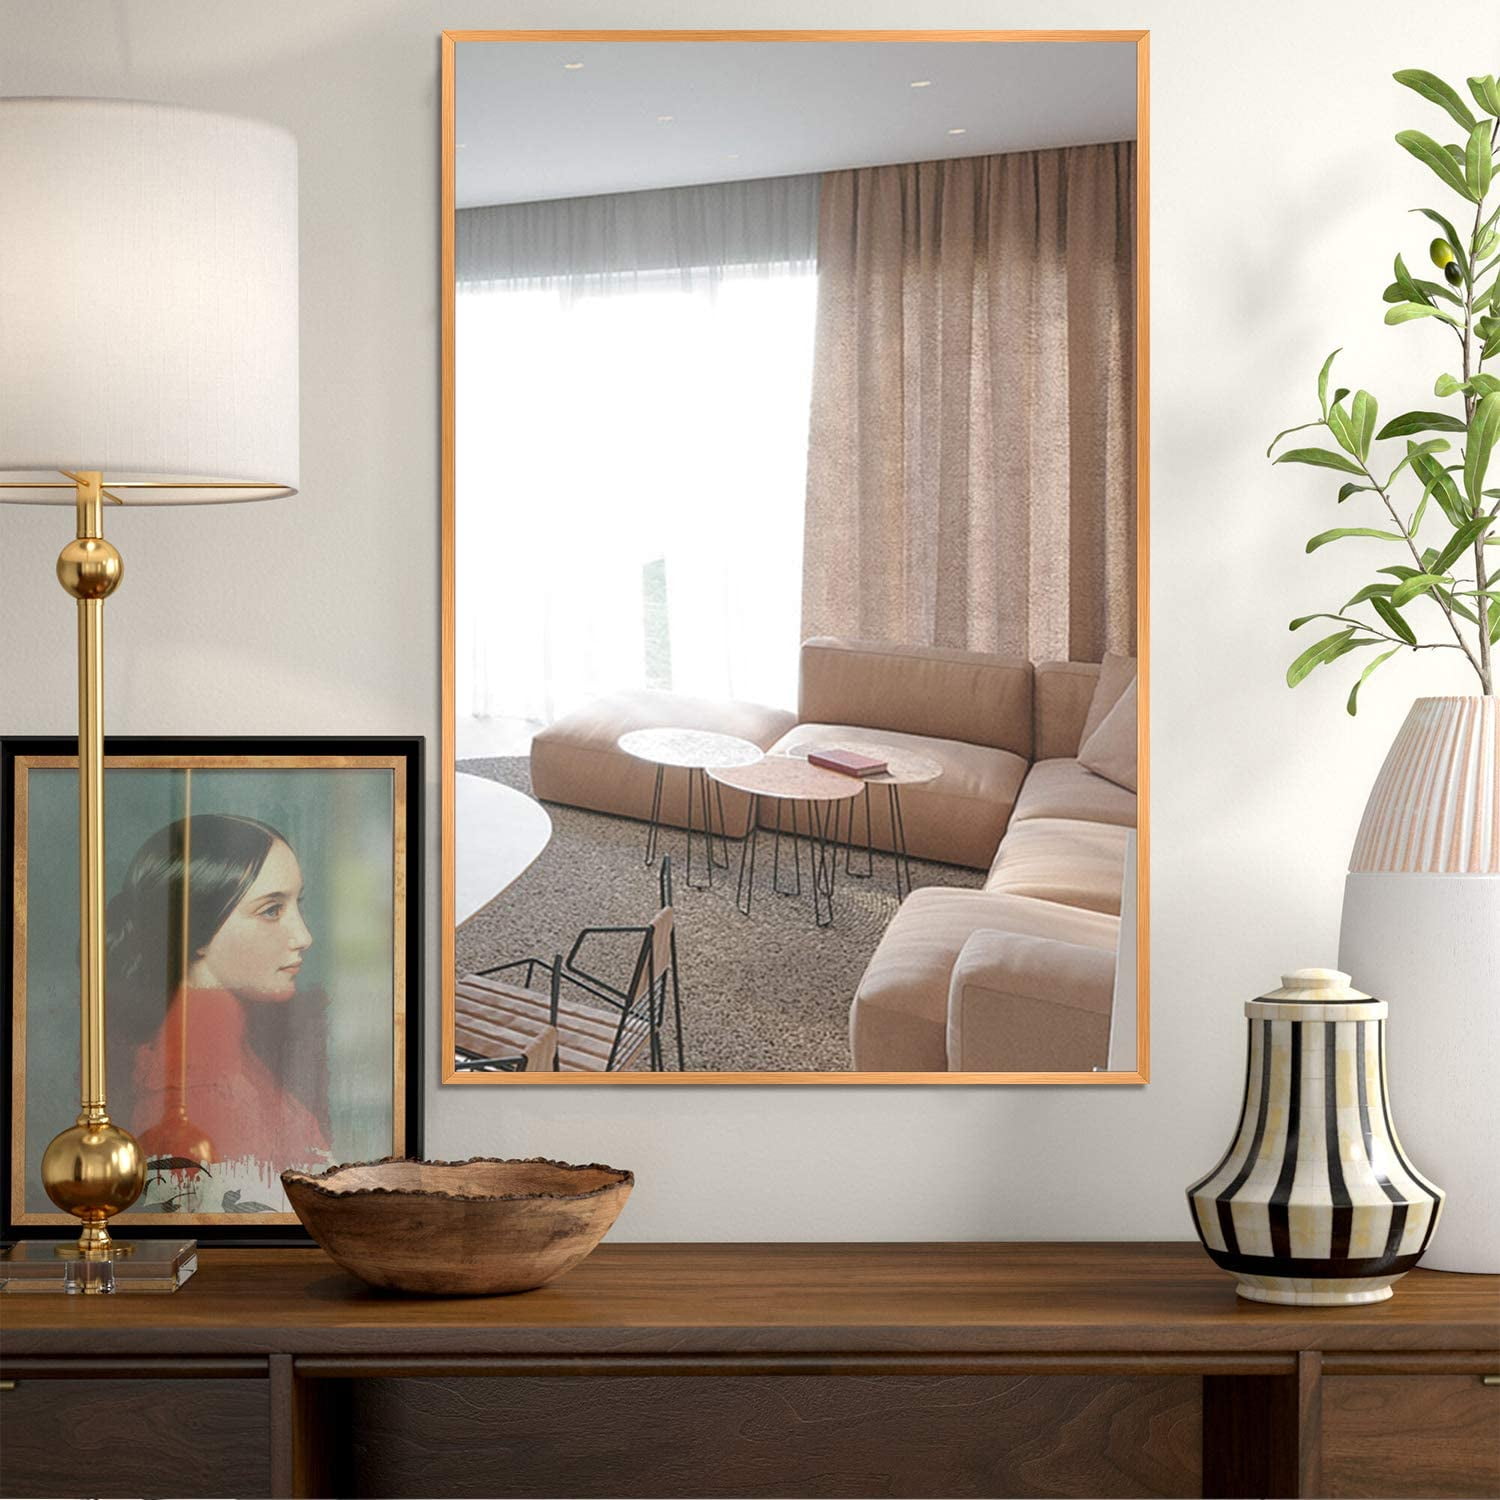 Decor Mirror Hanging/Leaning Large Wall Mounted Mirror Horizontal/Vertical Bedroom Mirror